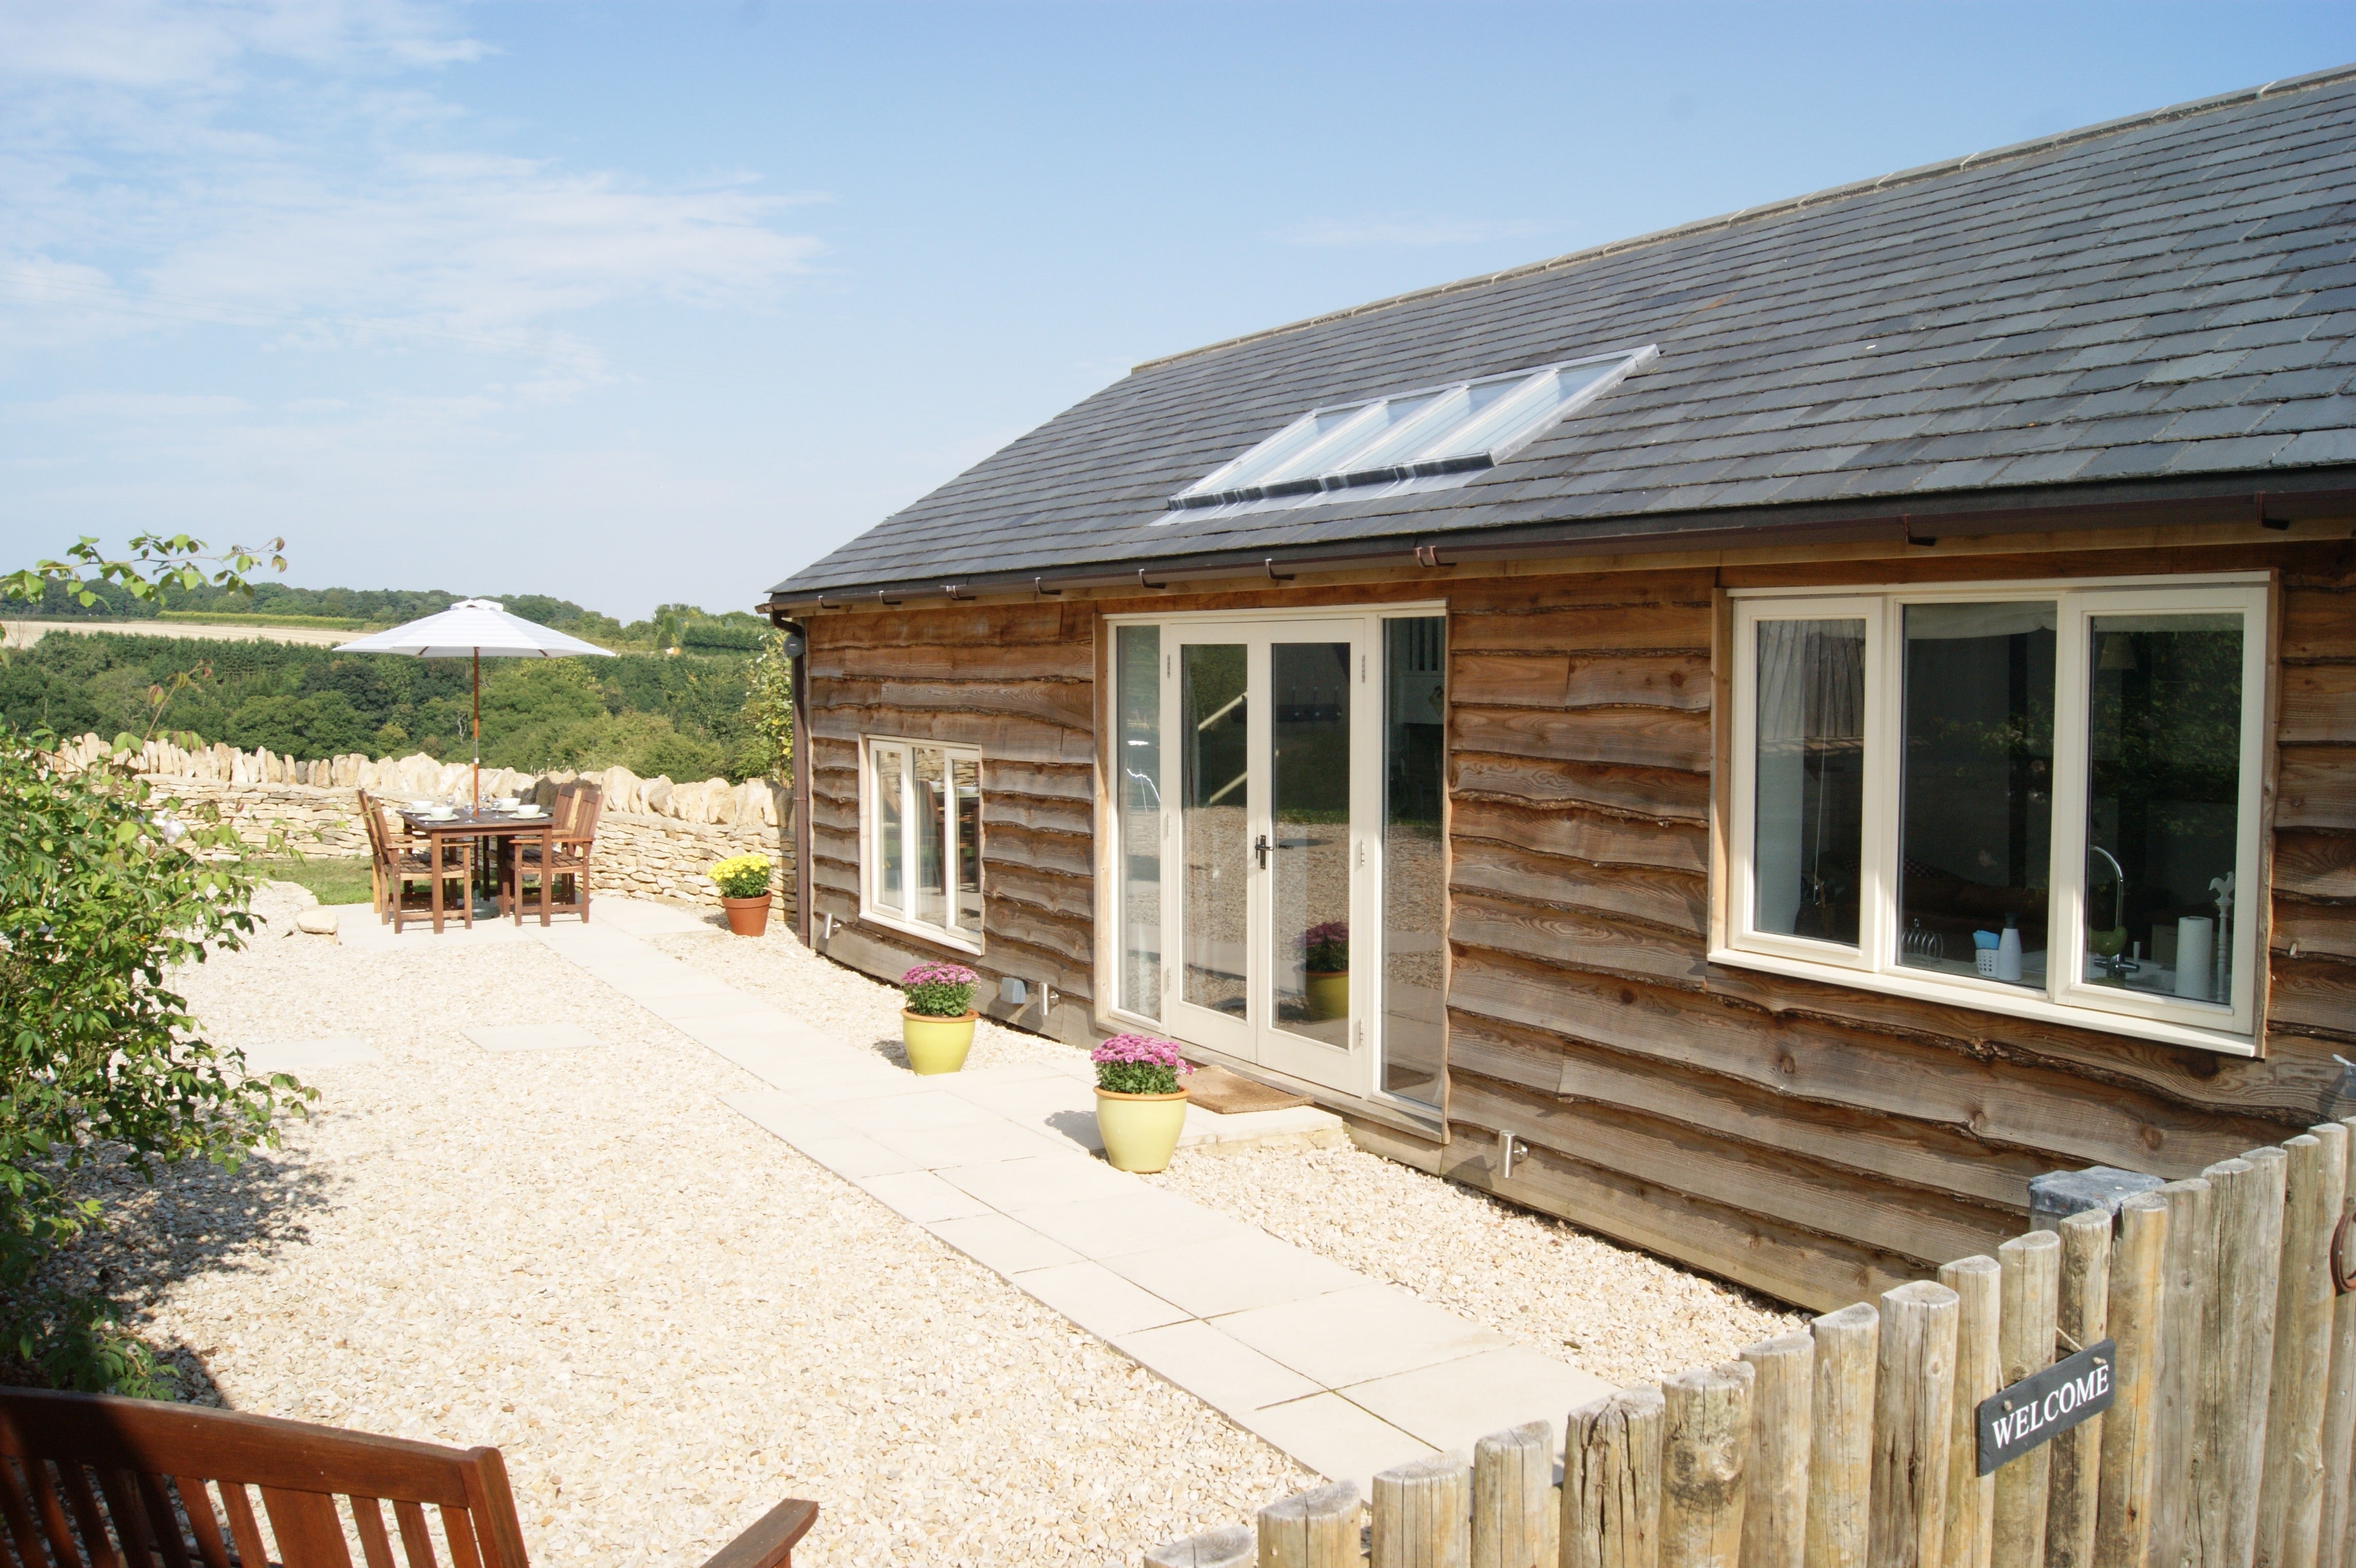 Hoarstone Cottage facilities boast a swimming pool, garden and tennis court